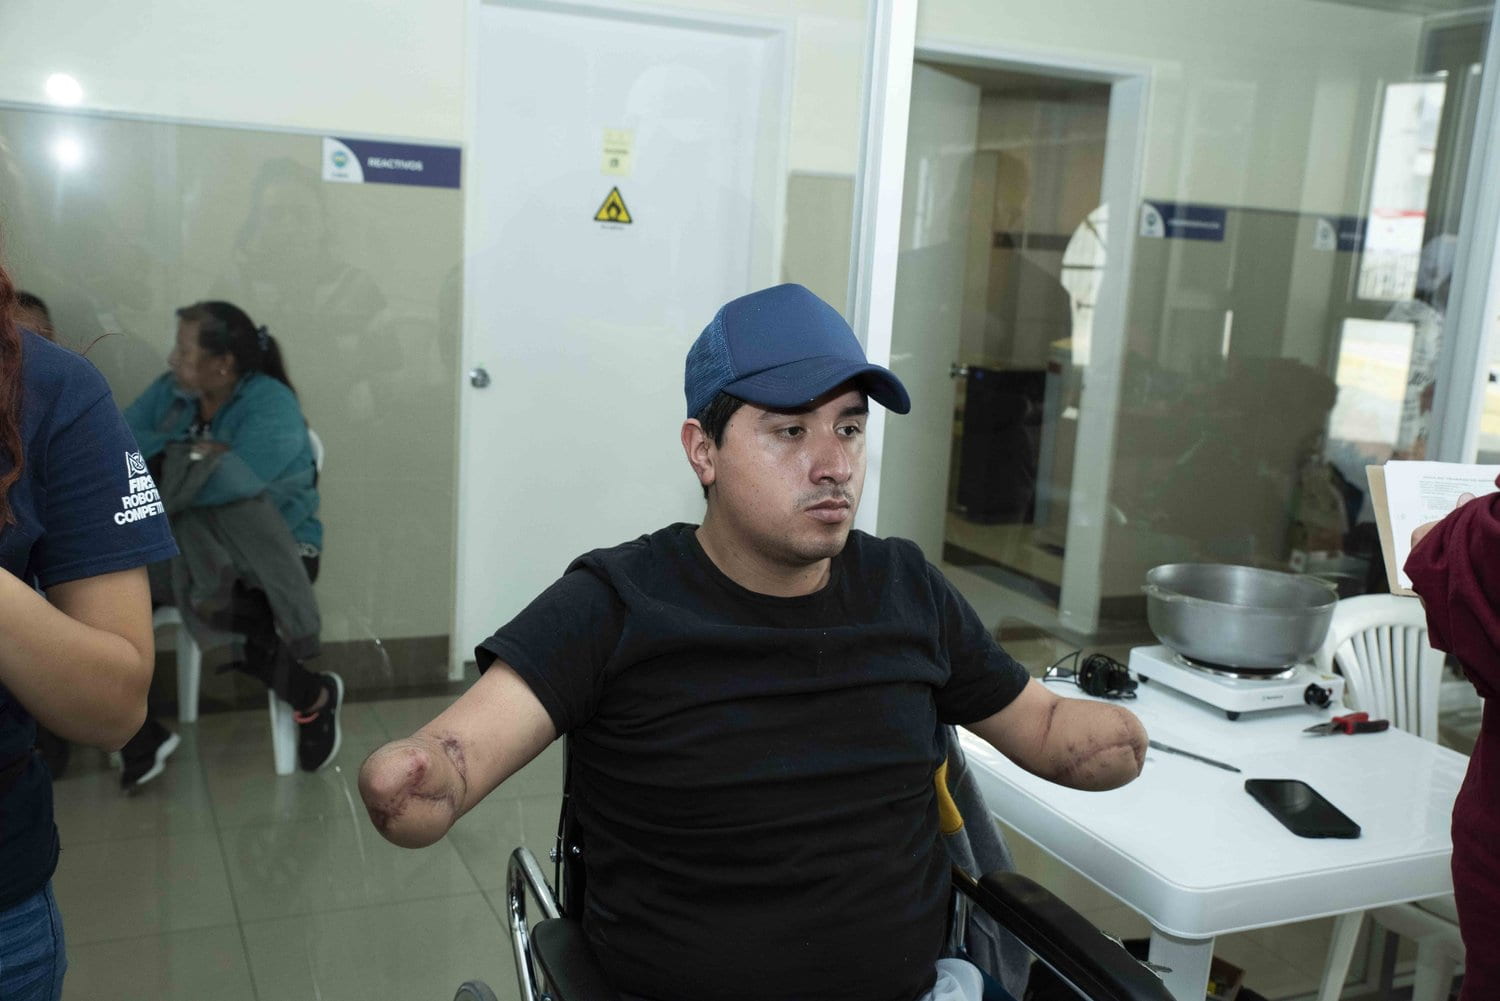 Jefferson Aguirre, whose arms and legs were amputated after he was electrocuted while cutting pipe.